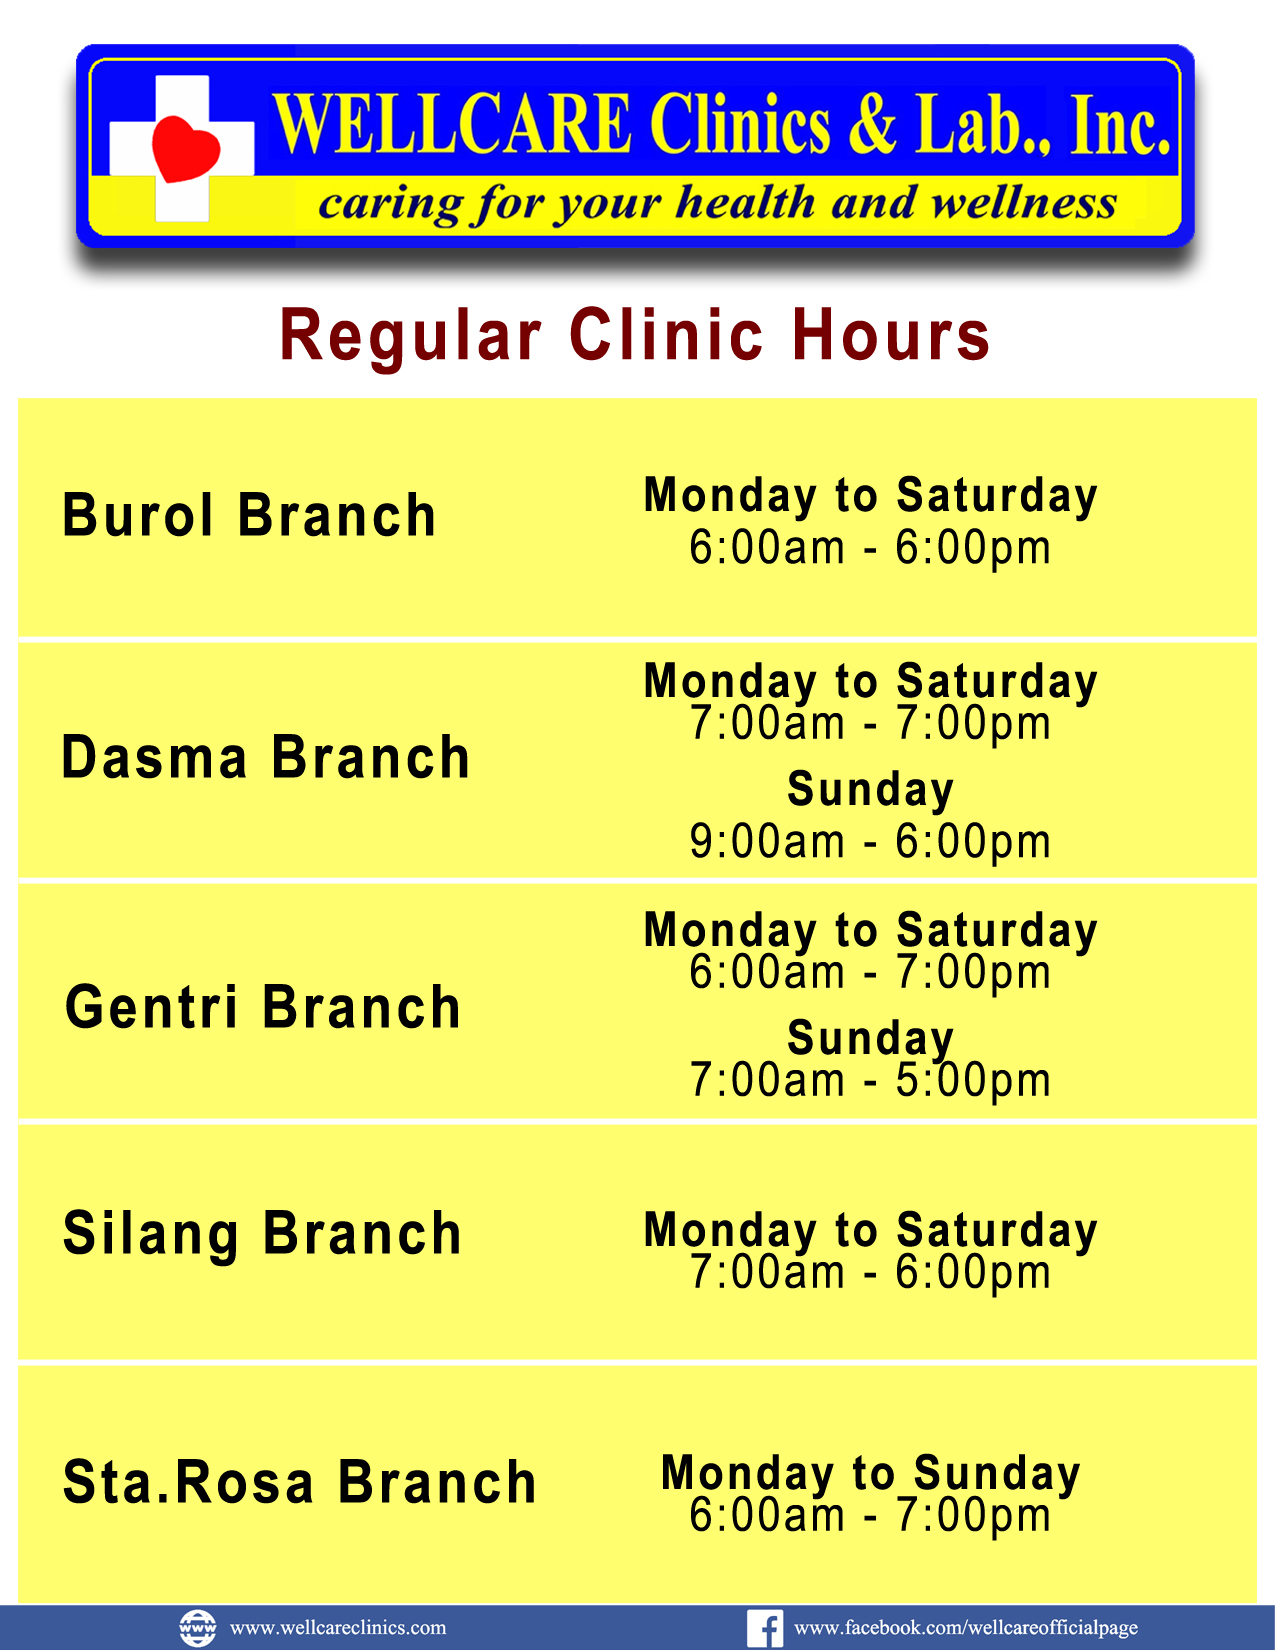 Regular Clinic Schedule resumes Today, April 22 (Monday) at all Wellcare Clinics Branches. #IAMWELLCARE "Caring for your Health & Wellness!" #ThinkHealth #ThinkWellness #ThinkWellcare